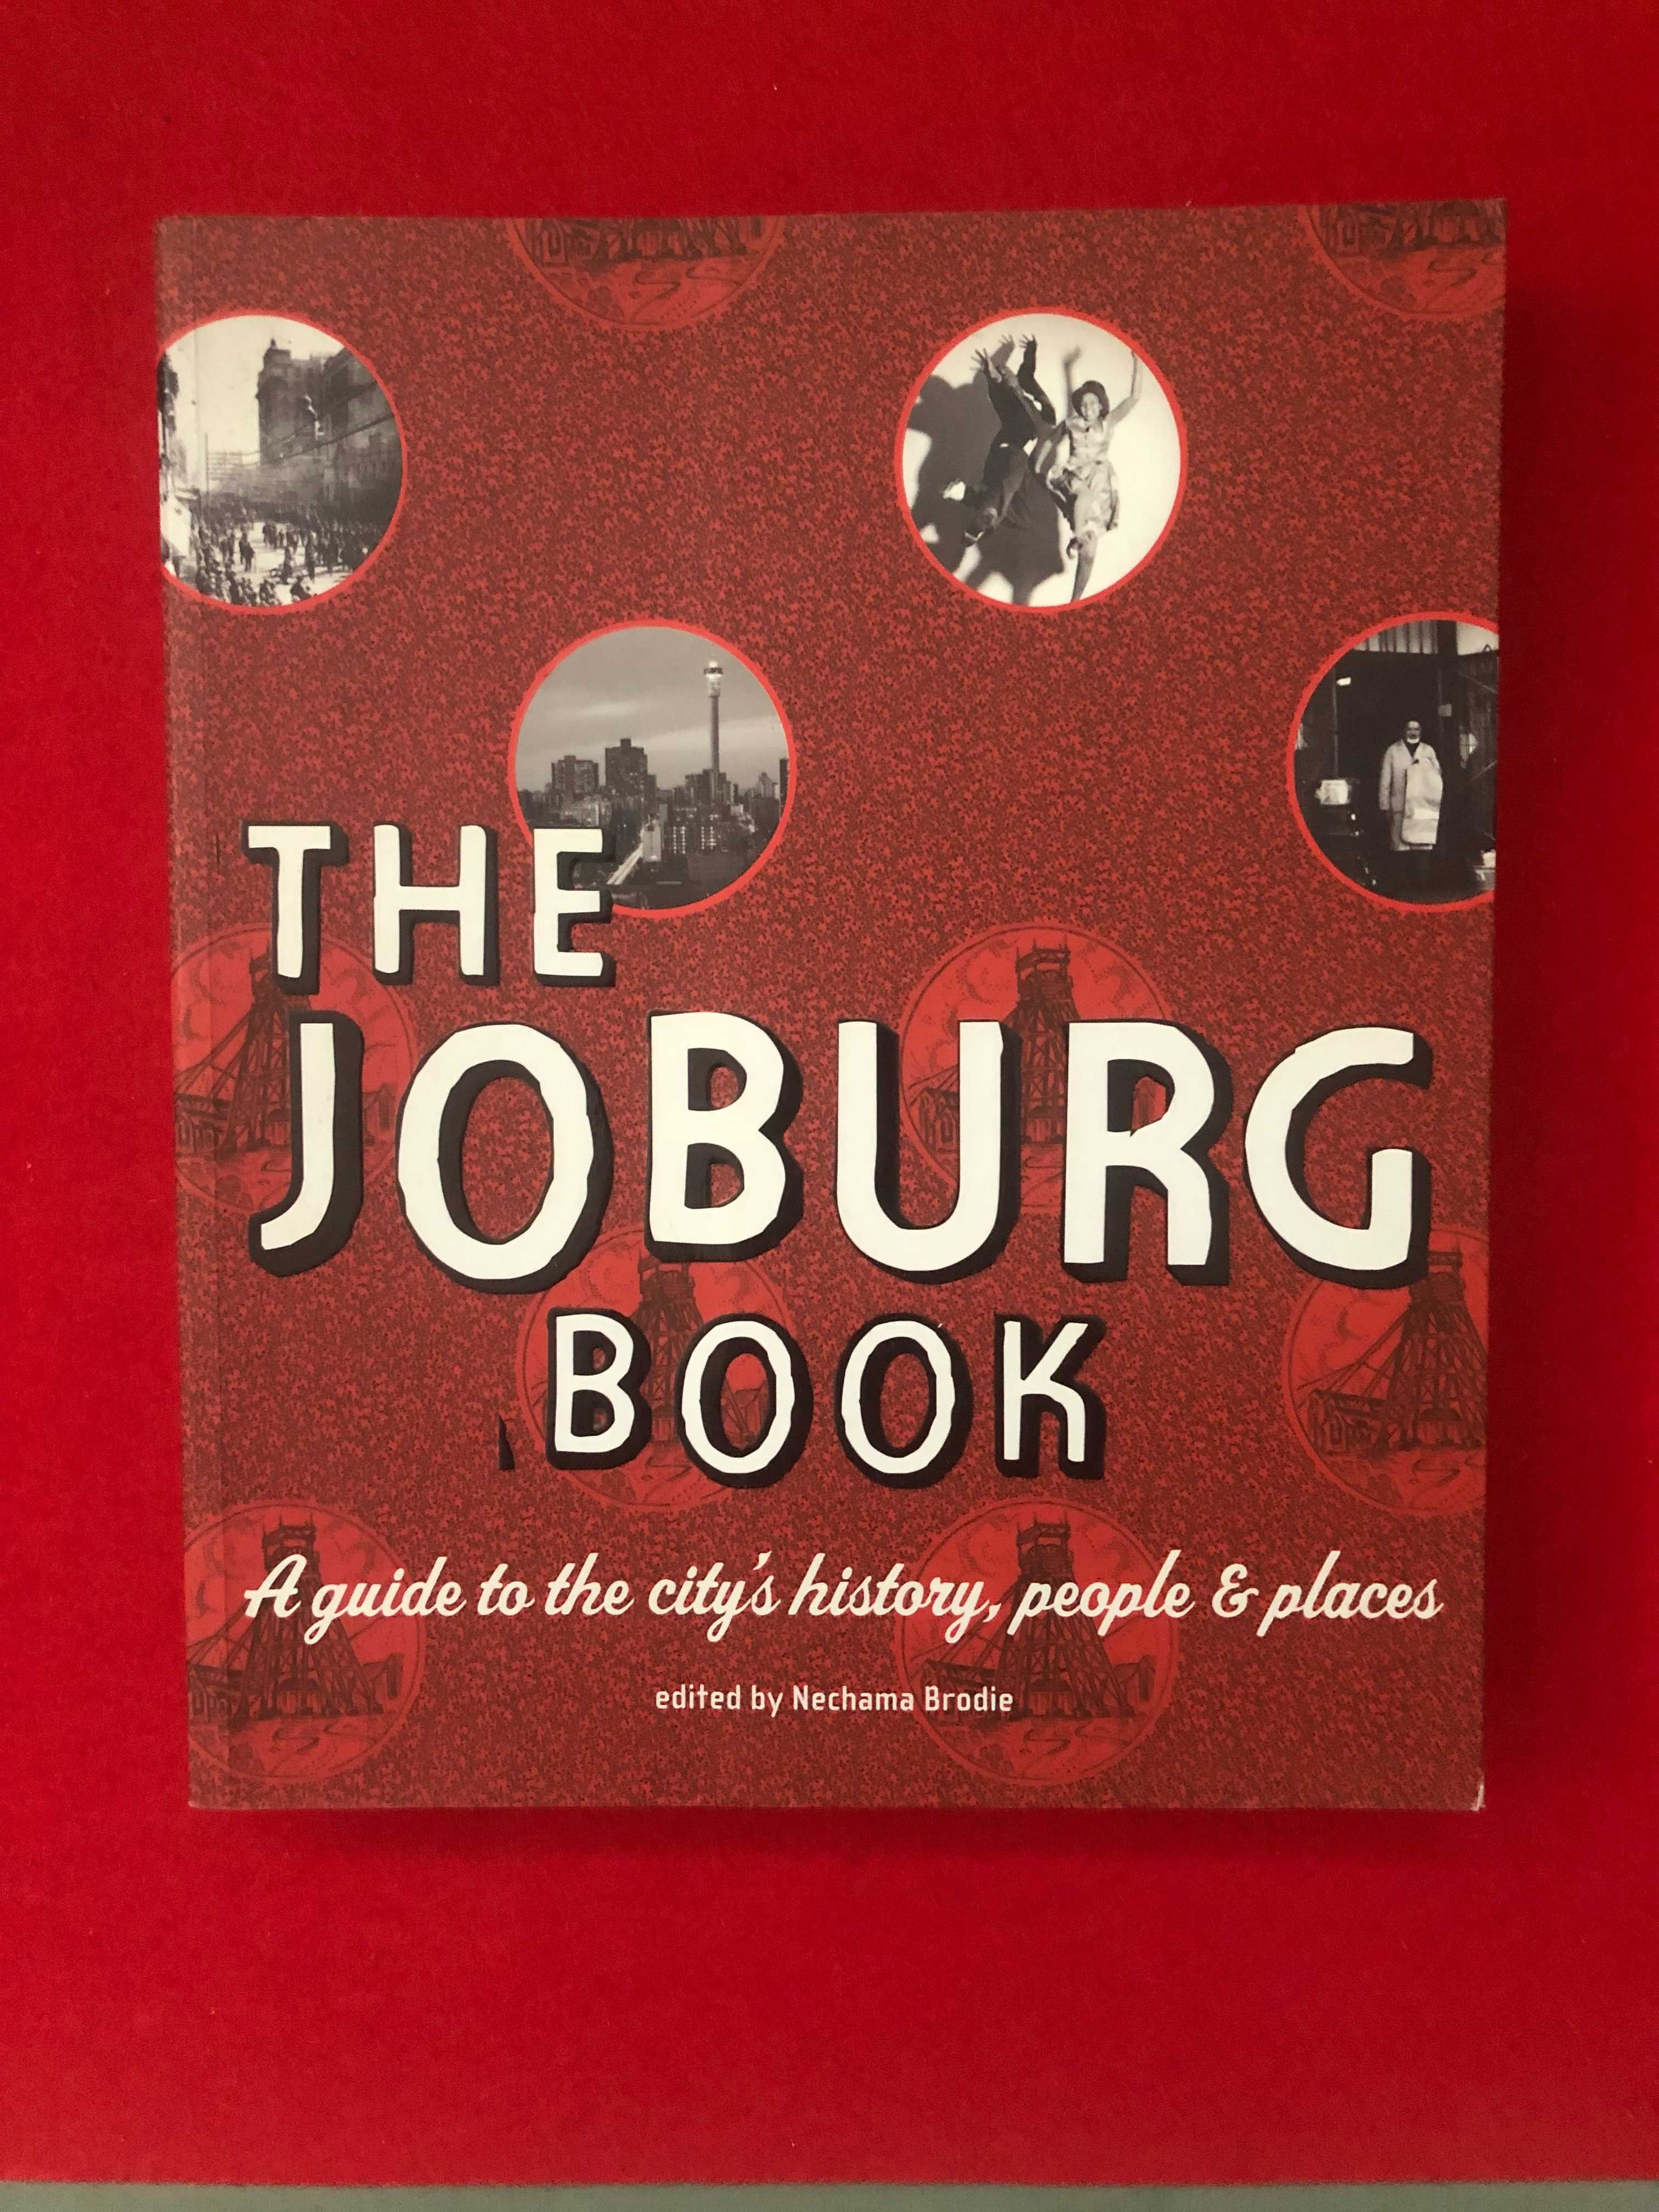 The Joburg Book – A guide to the city’s history, people & places